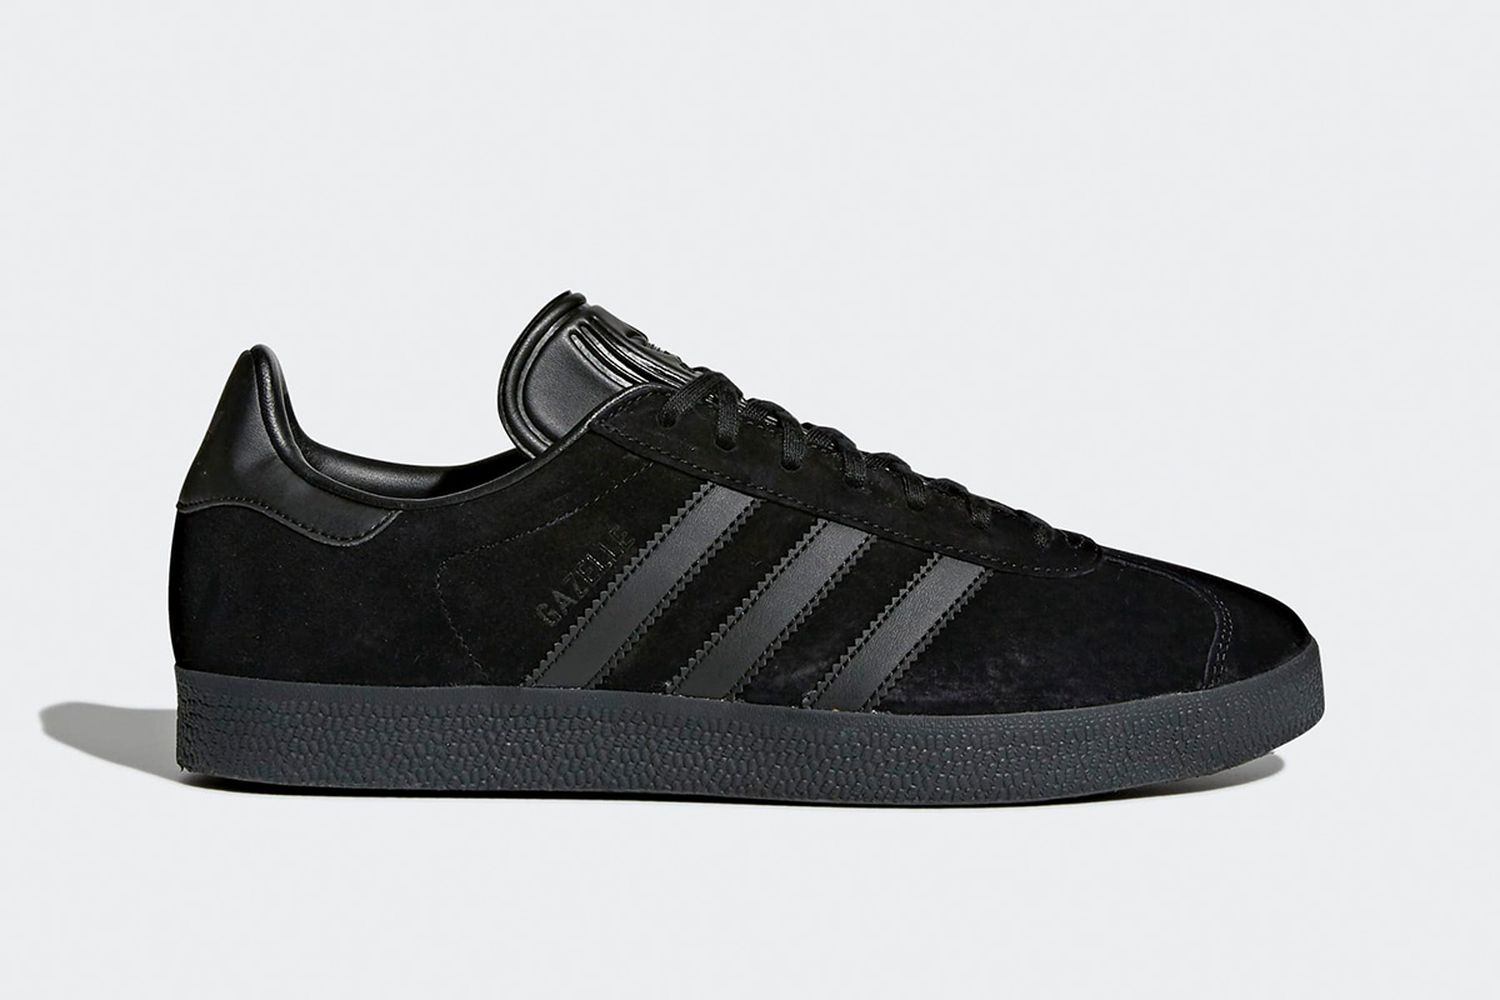 Fértil pista poco claro 9 Pairs of Classic adidas Sneakers That Every Rotation Needs